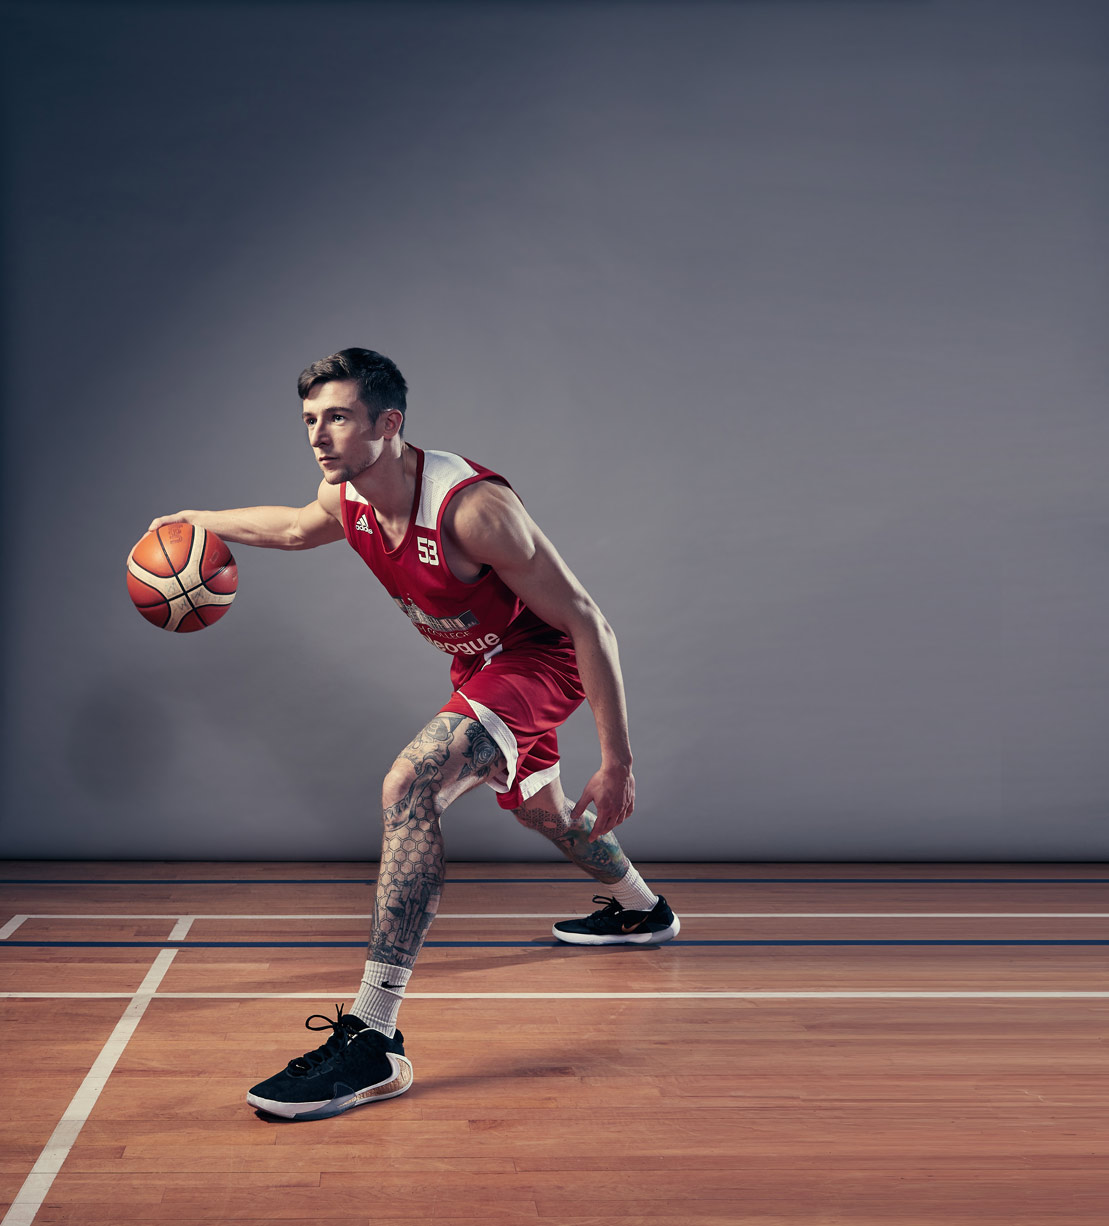 athlete portraits: the art of dribbling the basketball